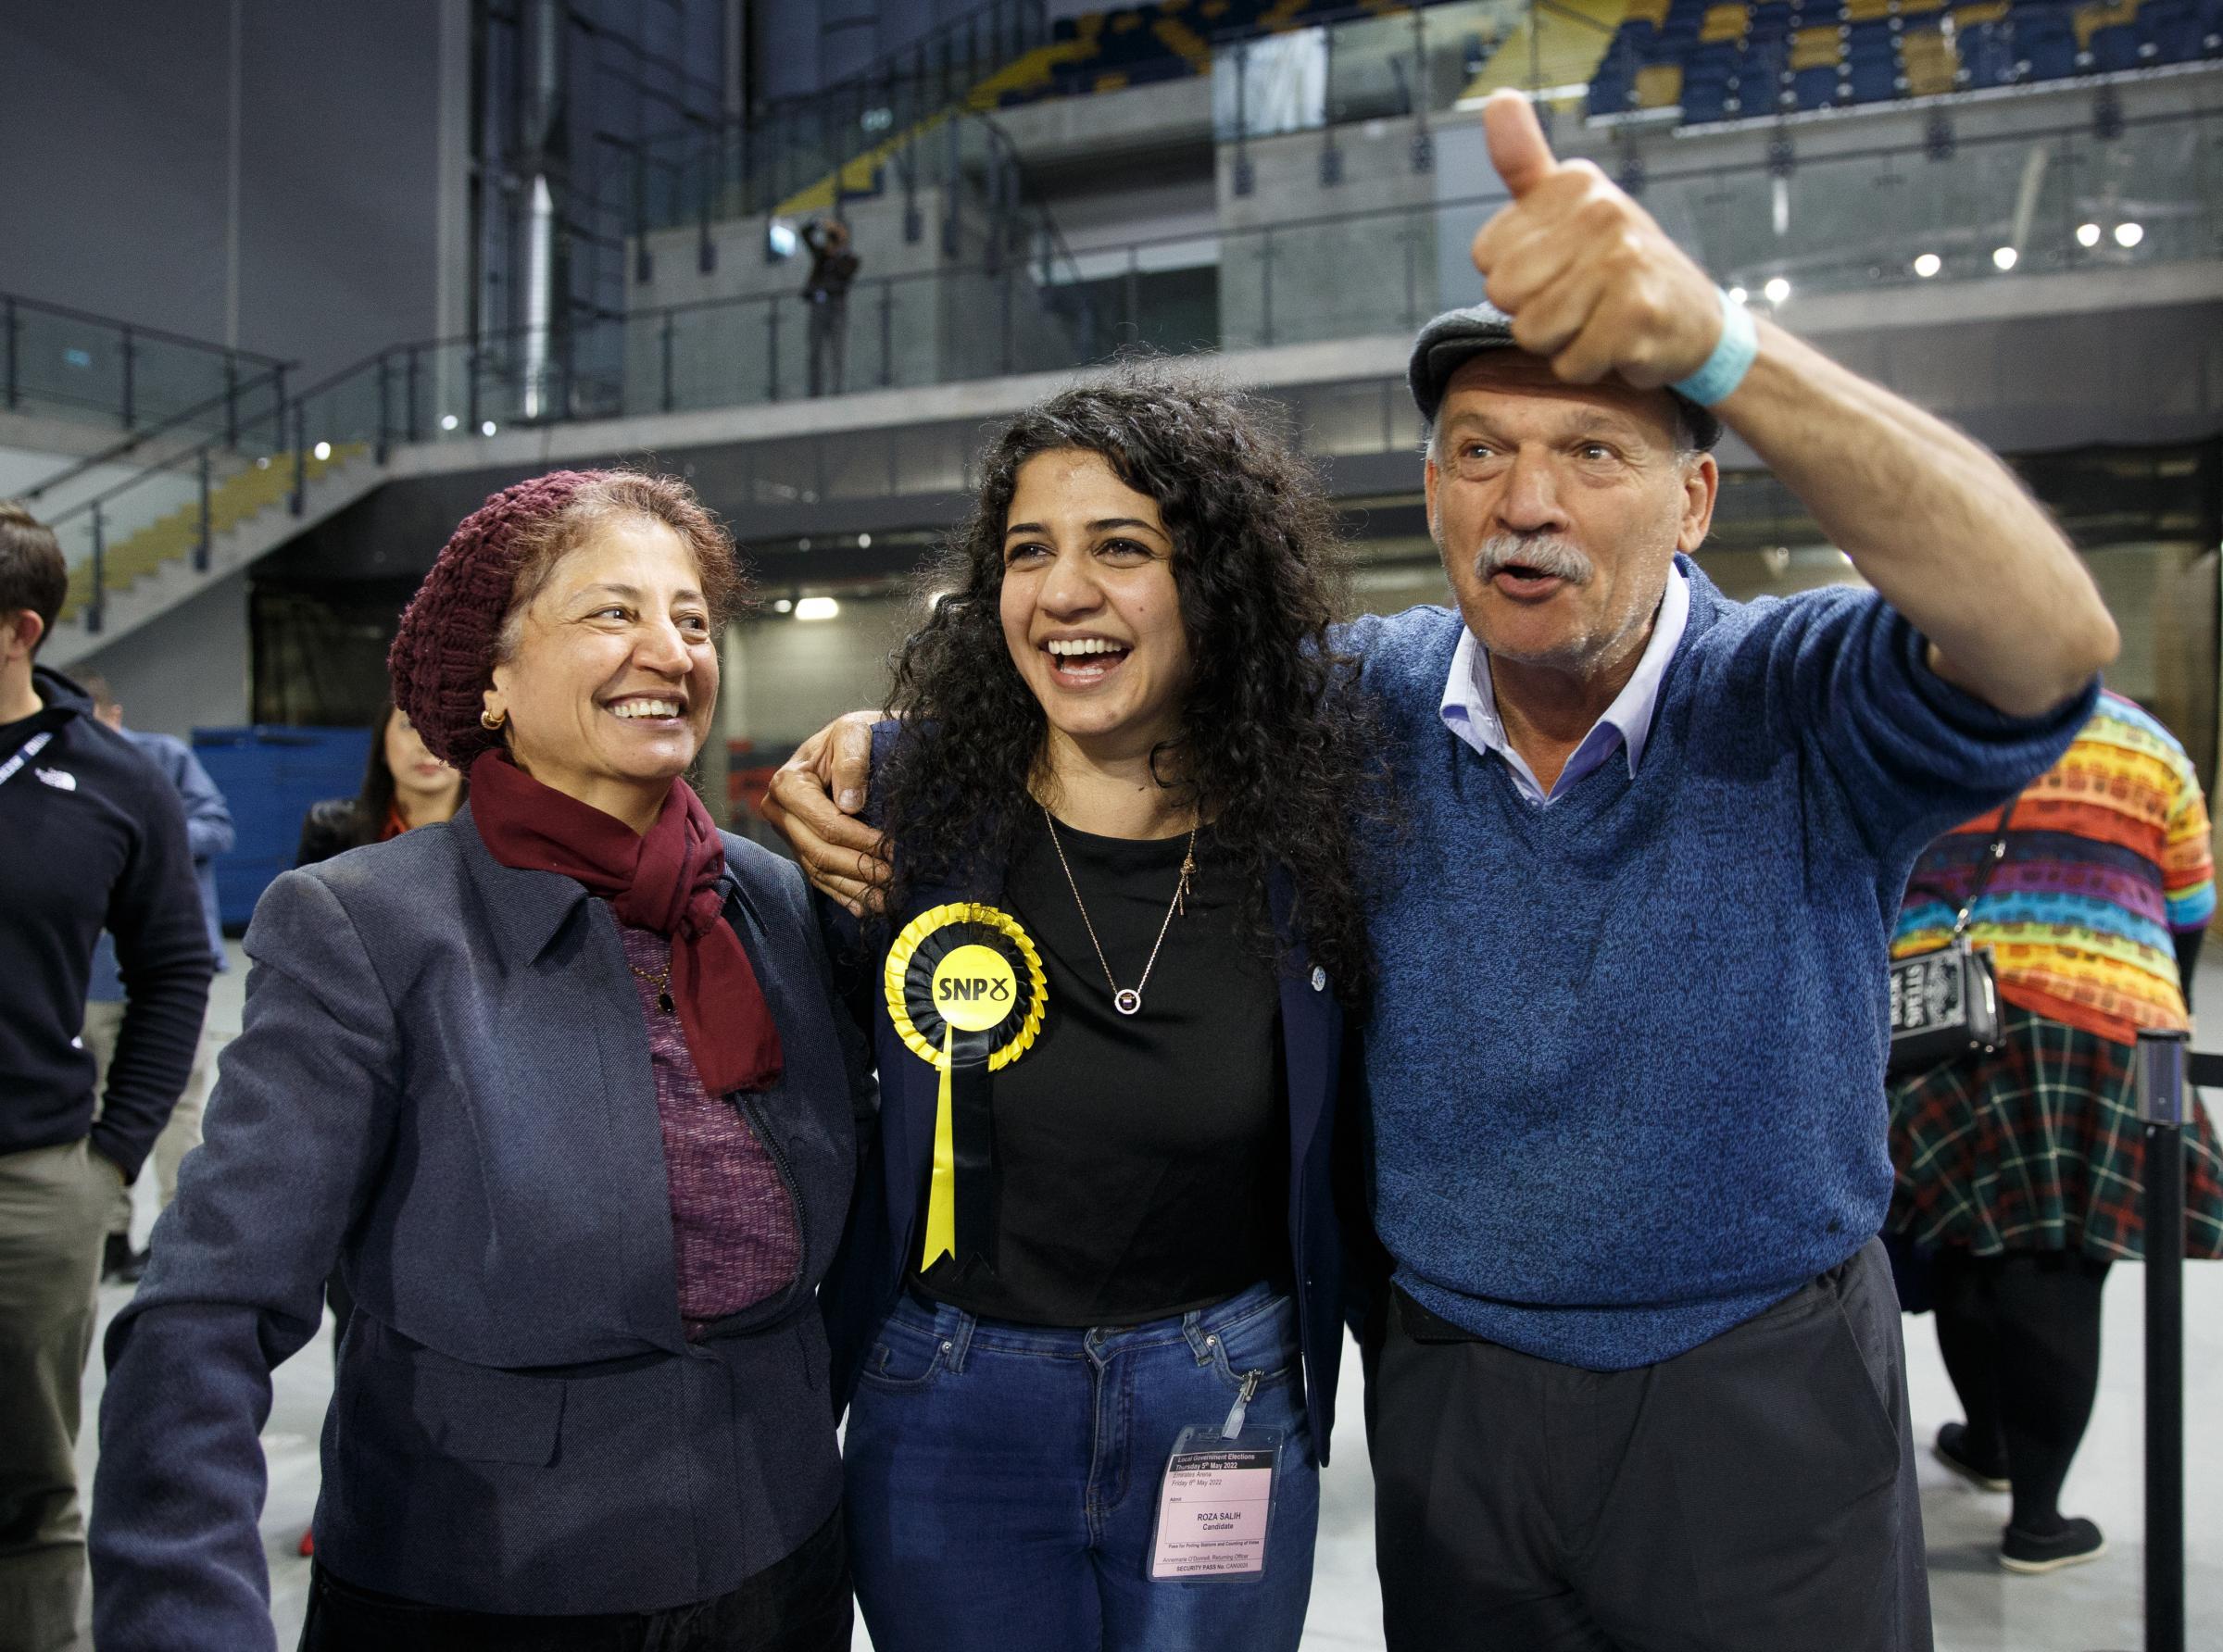 Roza Salih with her parents Tania and Saleem. Photograph by Colin Mearns.